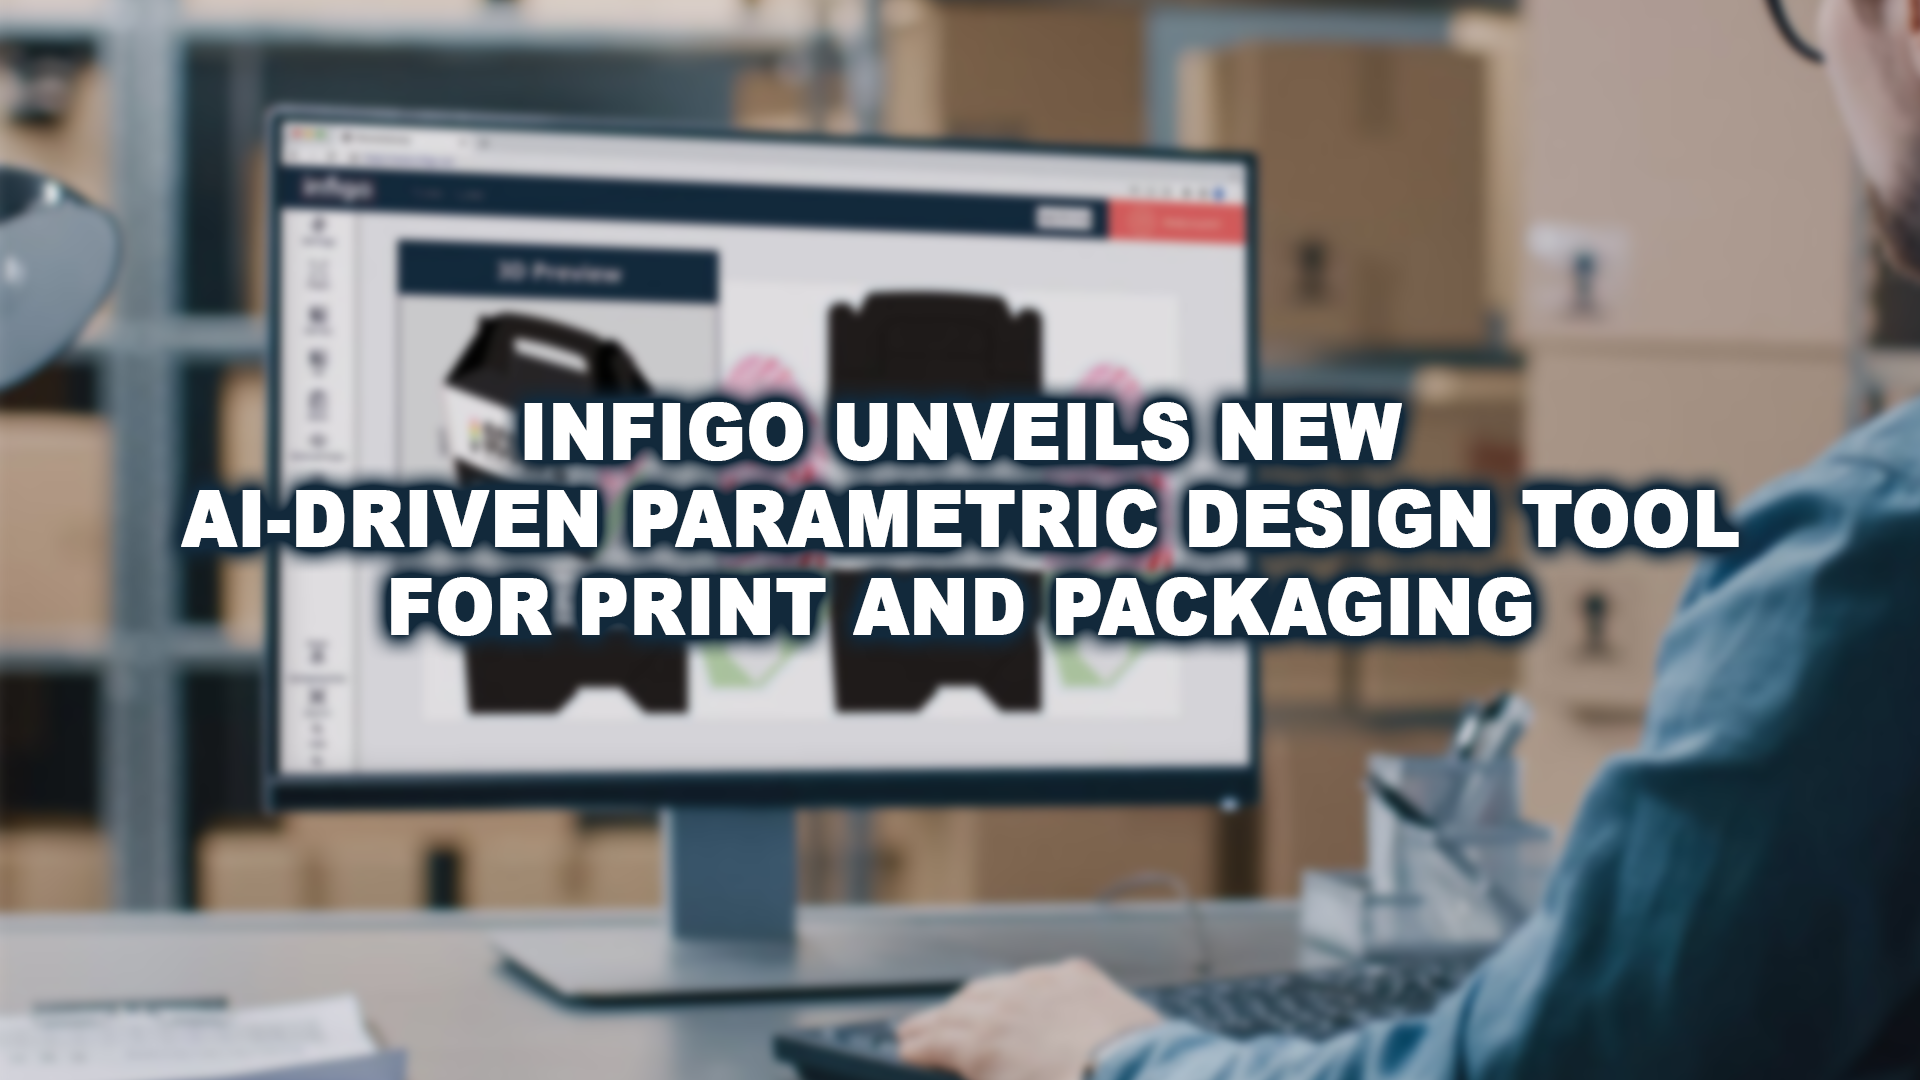 Www Xxx Videos Hd Nf Download - Infigo unveils new AI-driven parametric design tool for print and packaging  - Graphic Arts Media